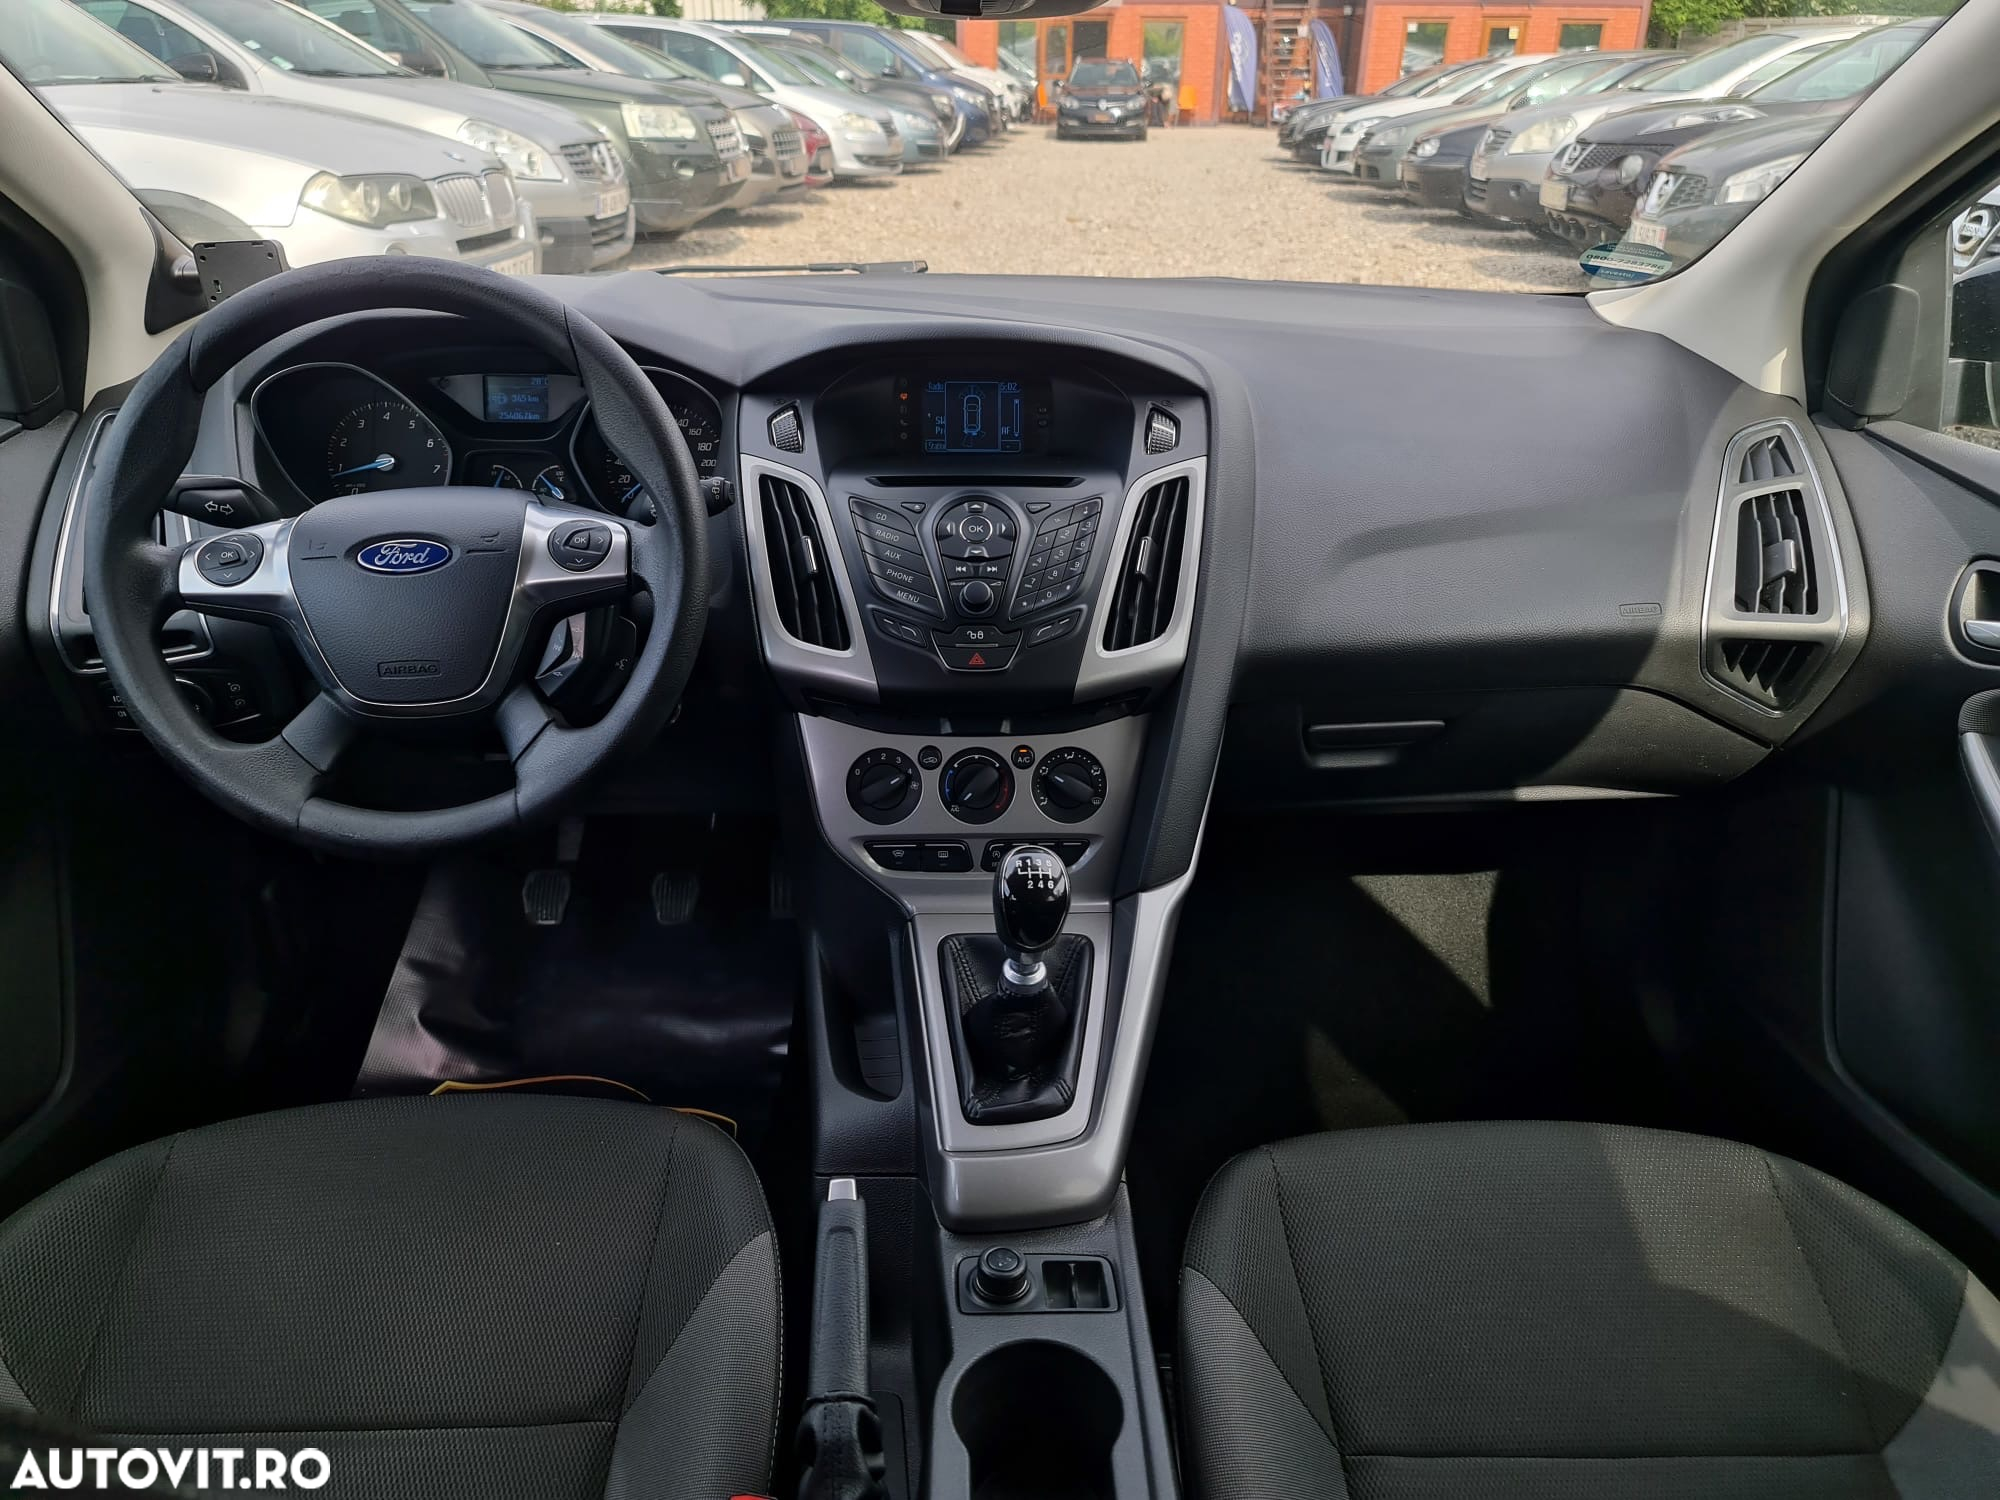 Ford Focus 1.6 Ecoboost Start Stop Trend - 5